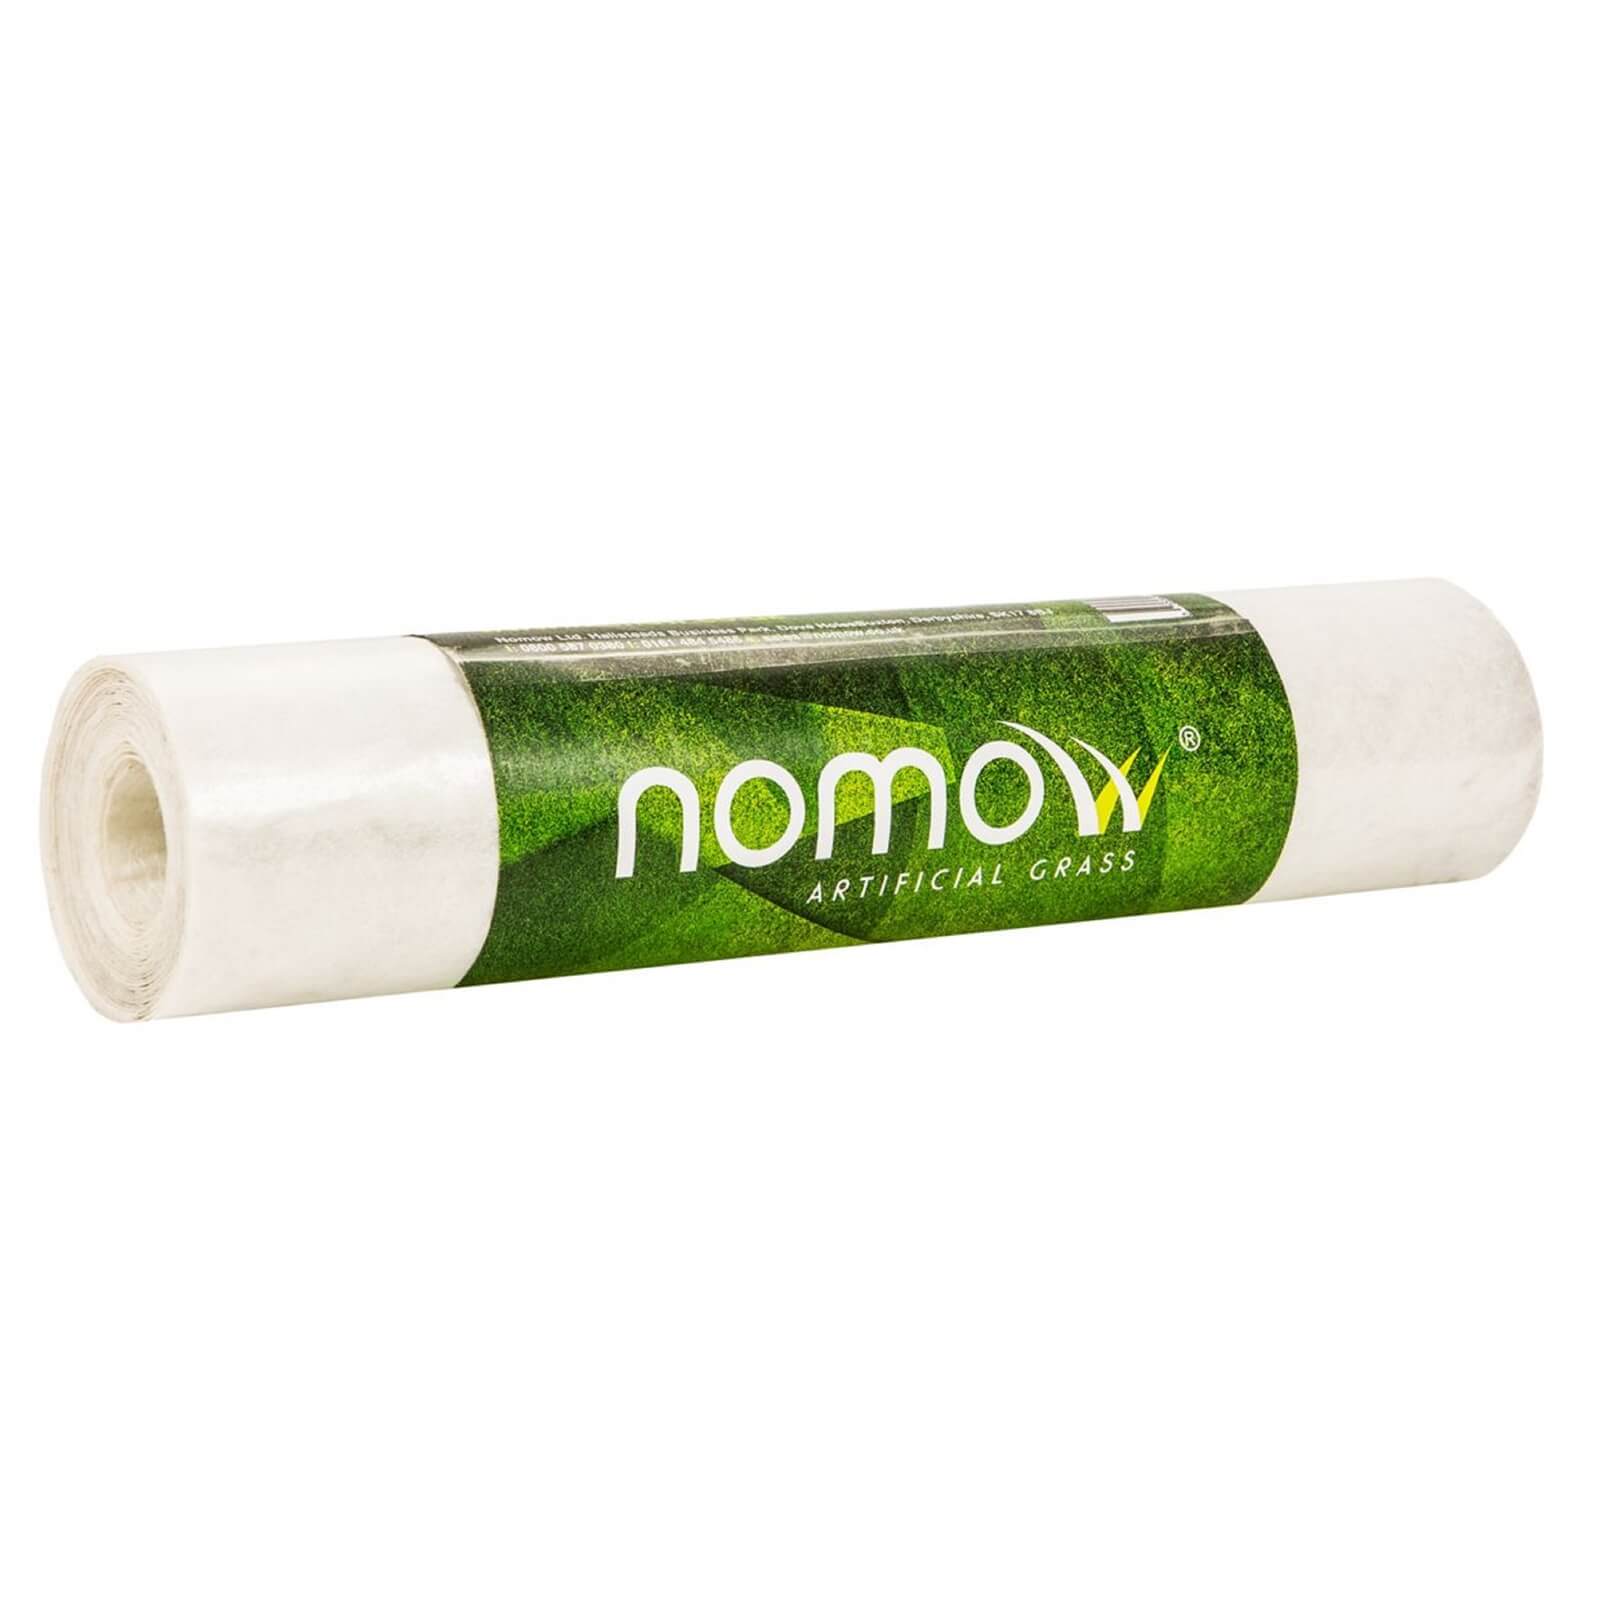 Nomow Artificial Grass Joining Tape - 4m